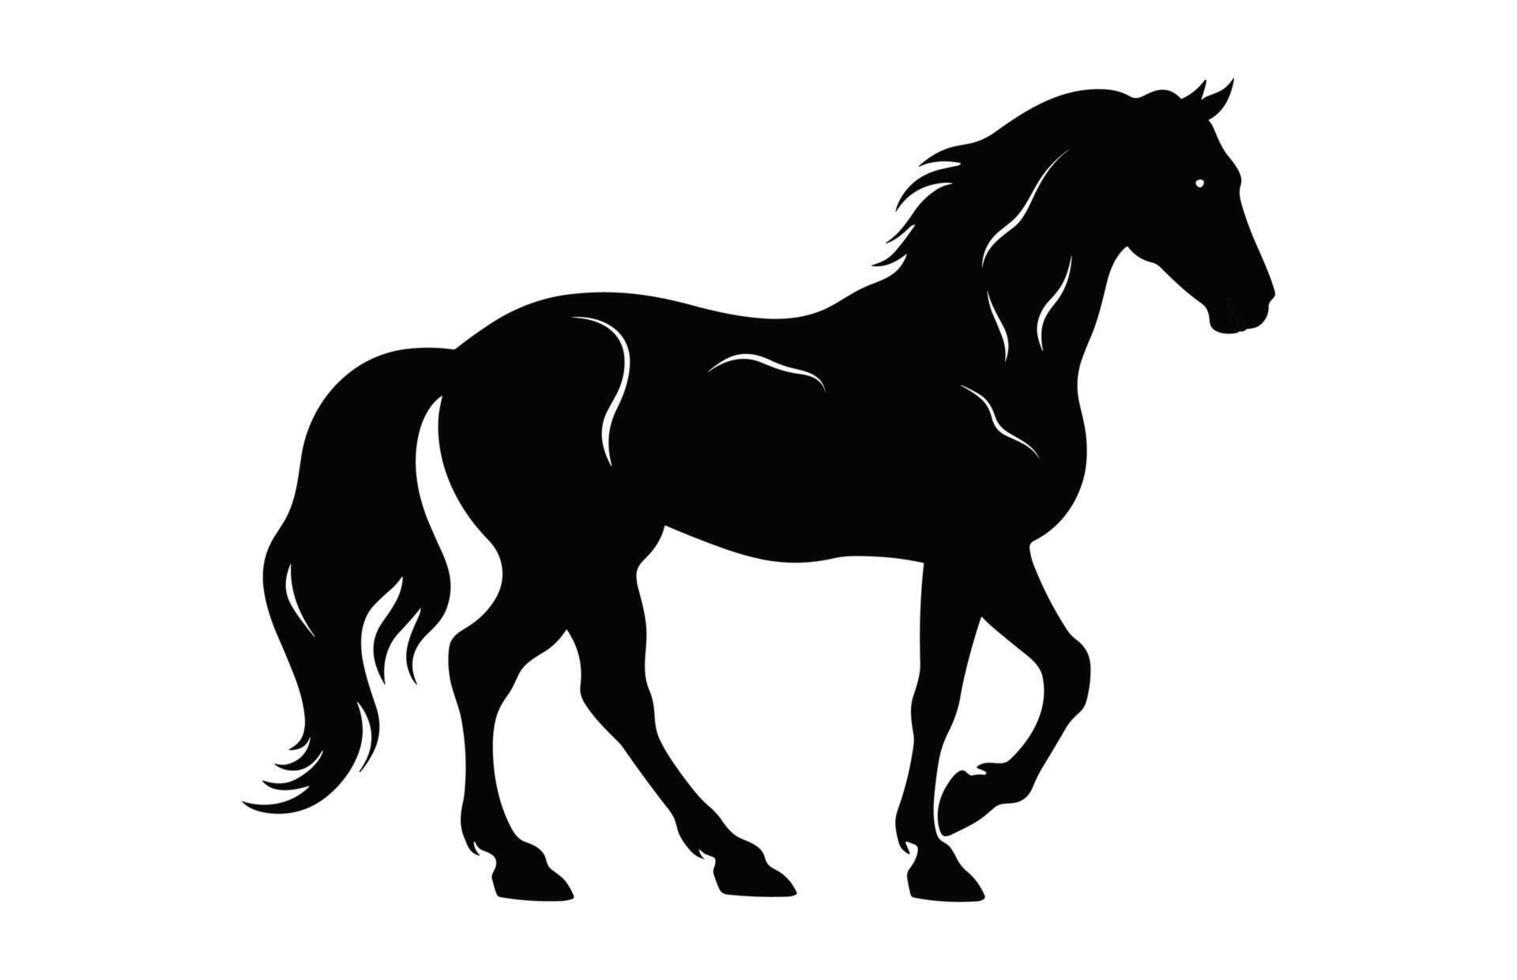 Horse black Silhouette isolated on a white background vector